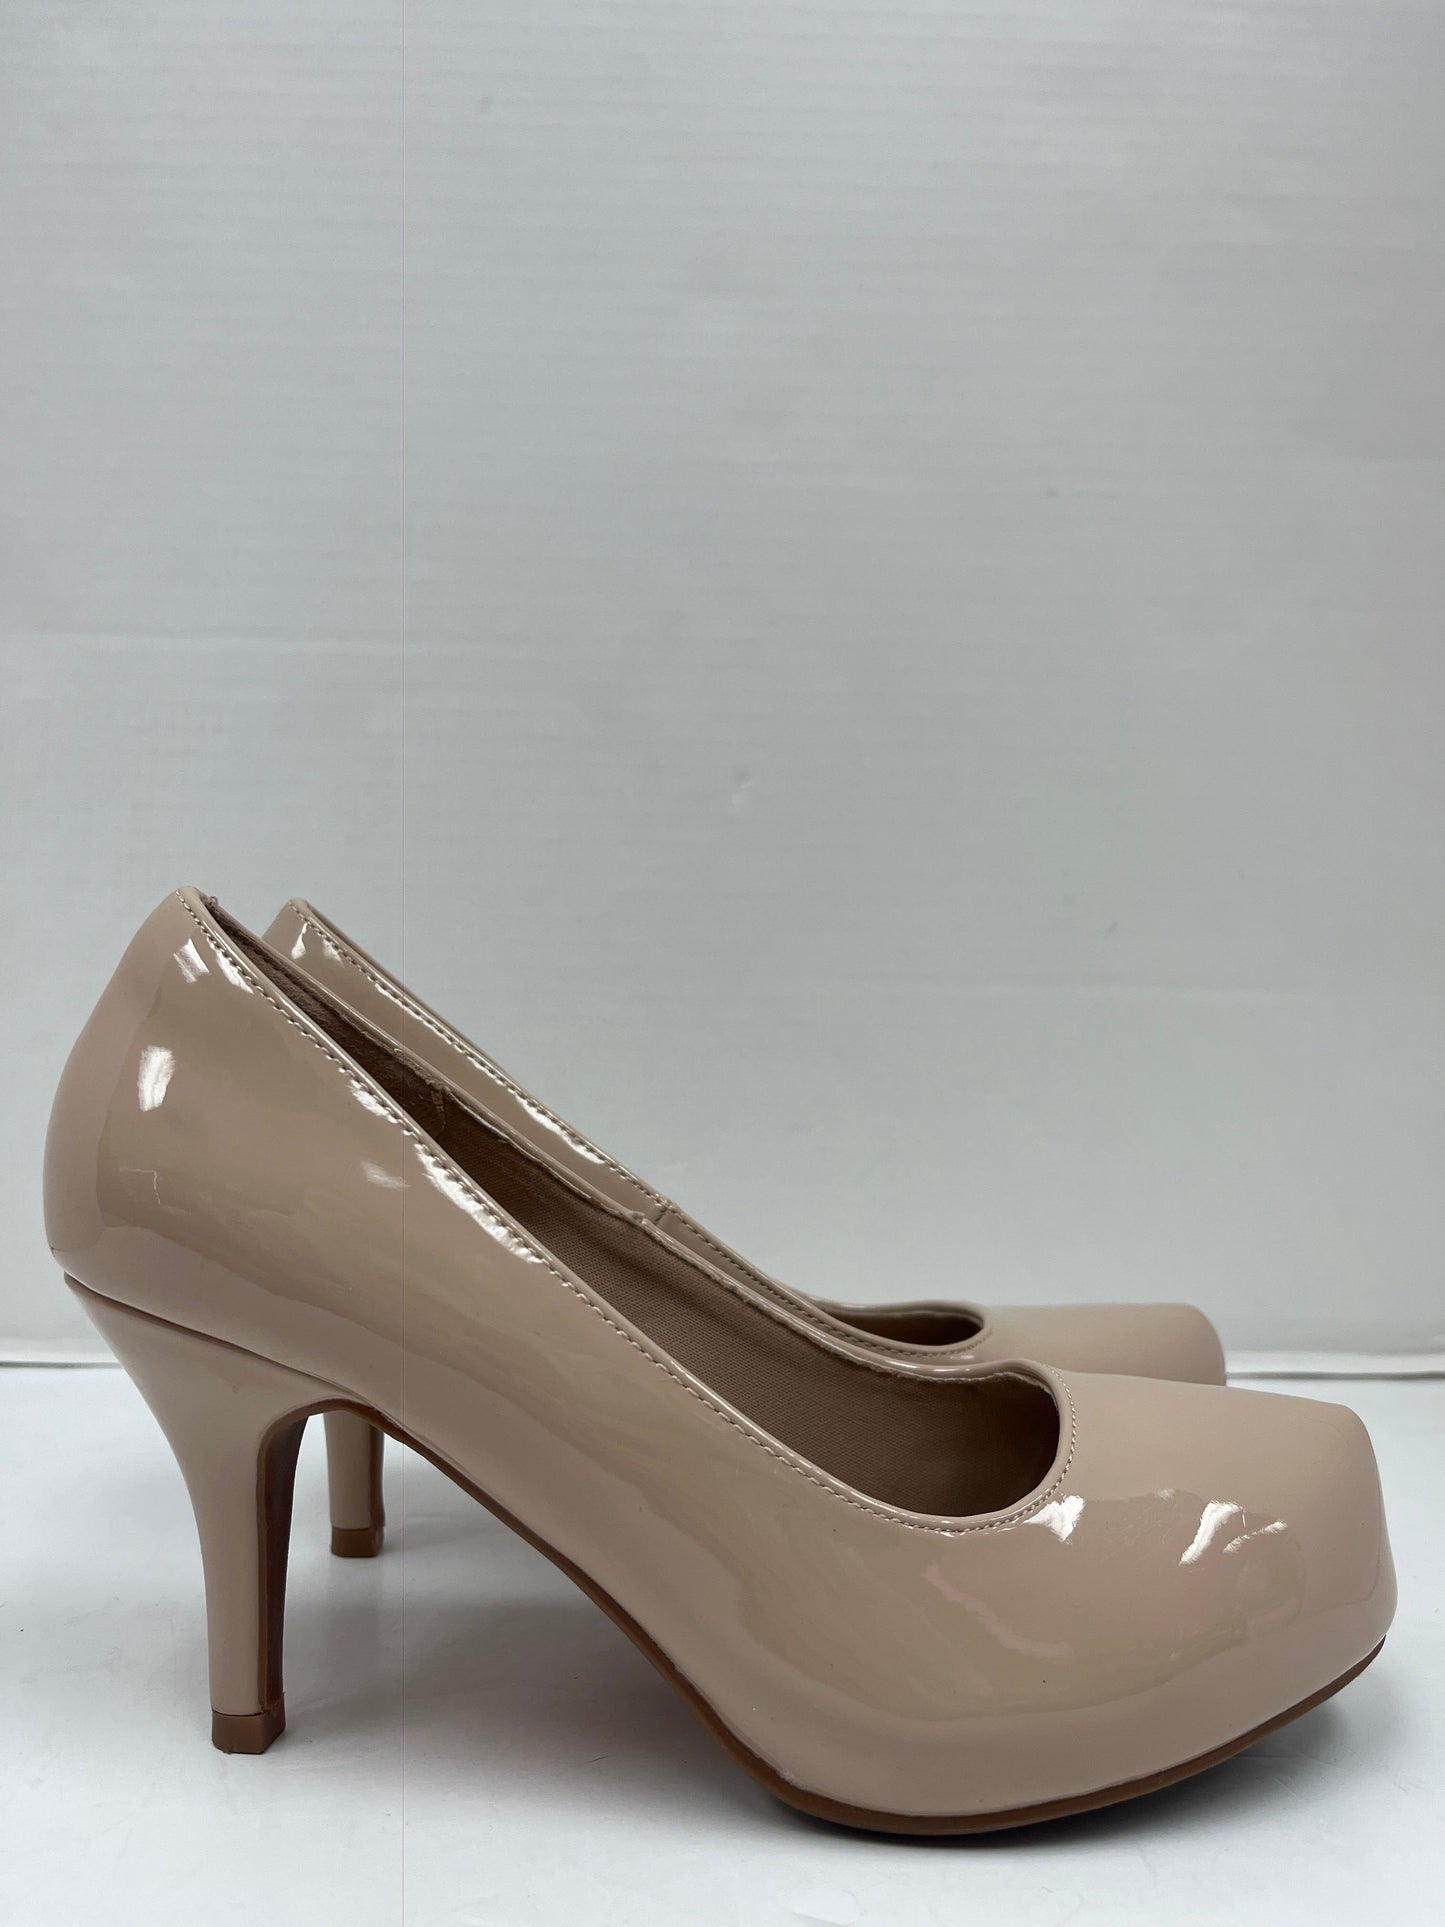 Shoes Heels Stiletto By Cmf  Size: 6.5